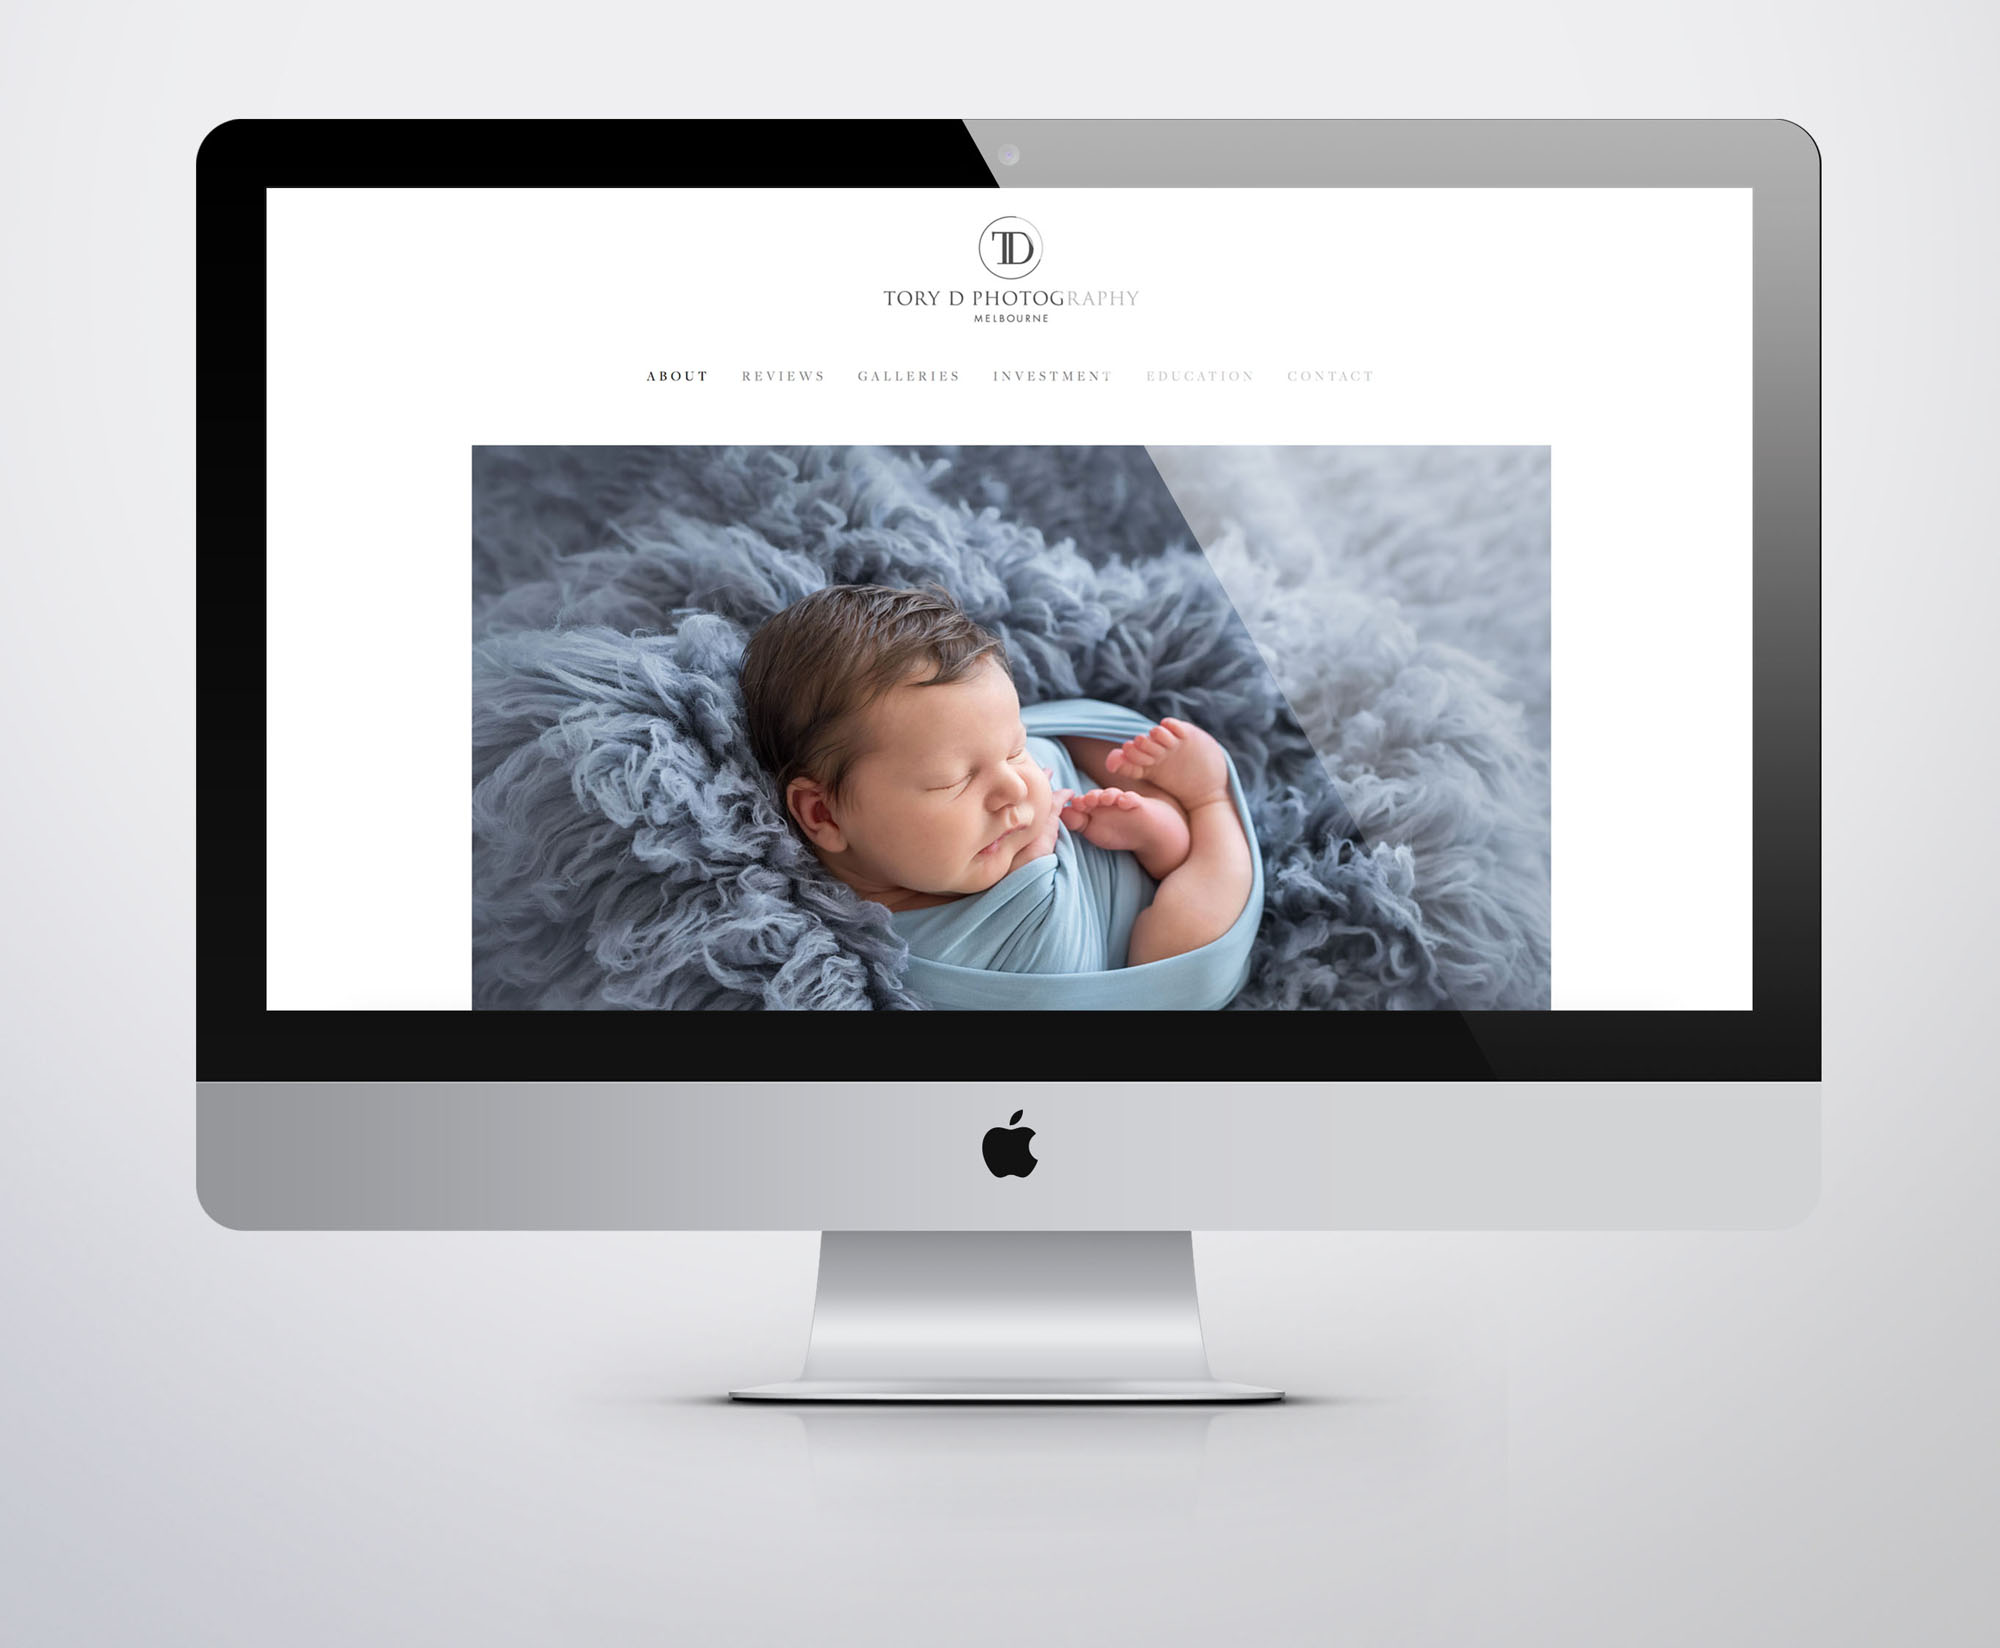 Tory D Photography Web Design Website for Photographers